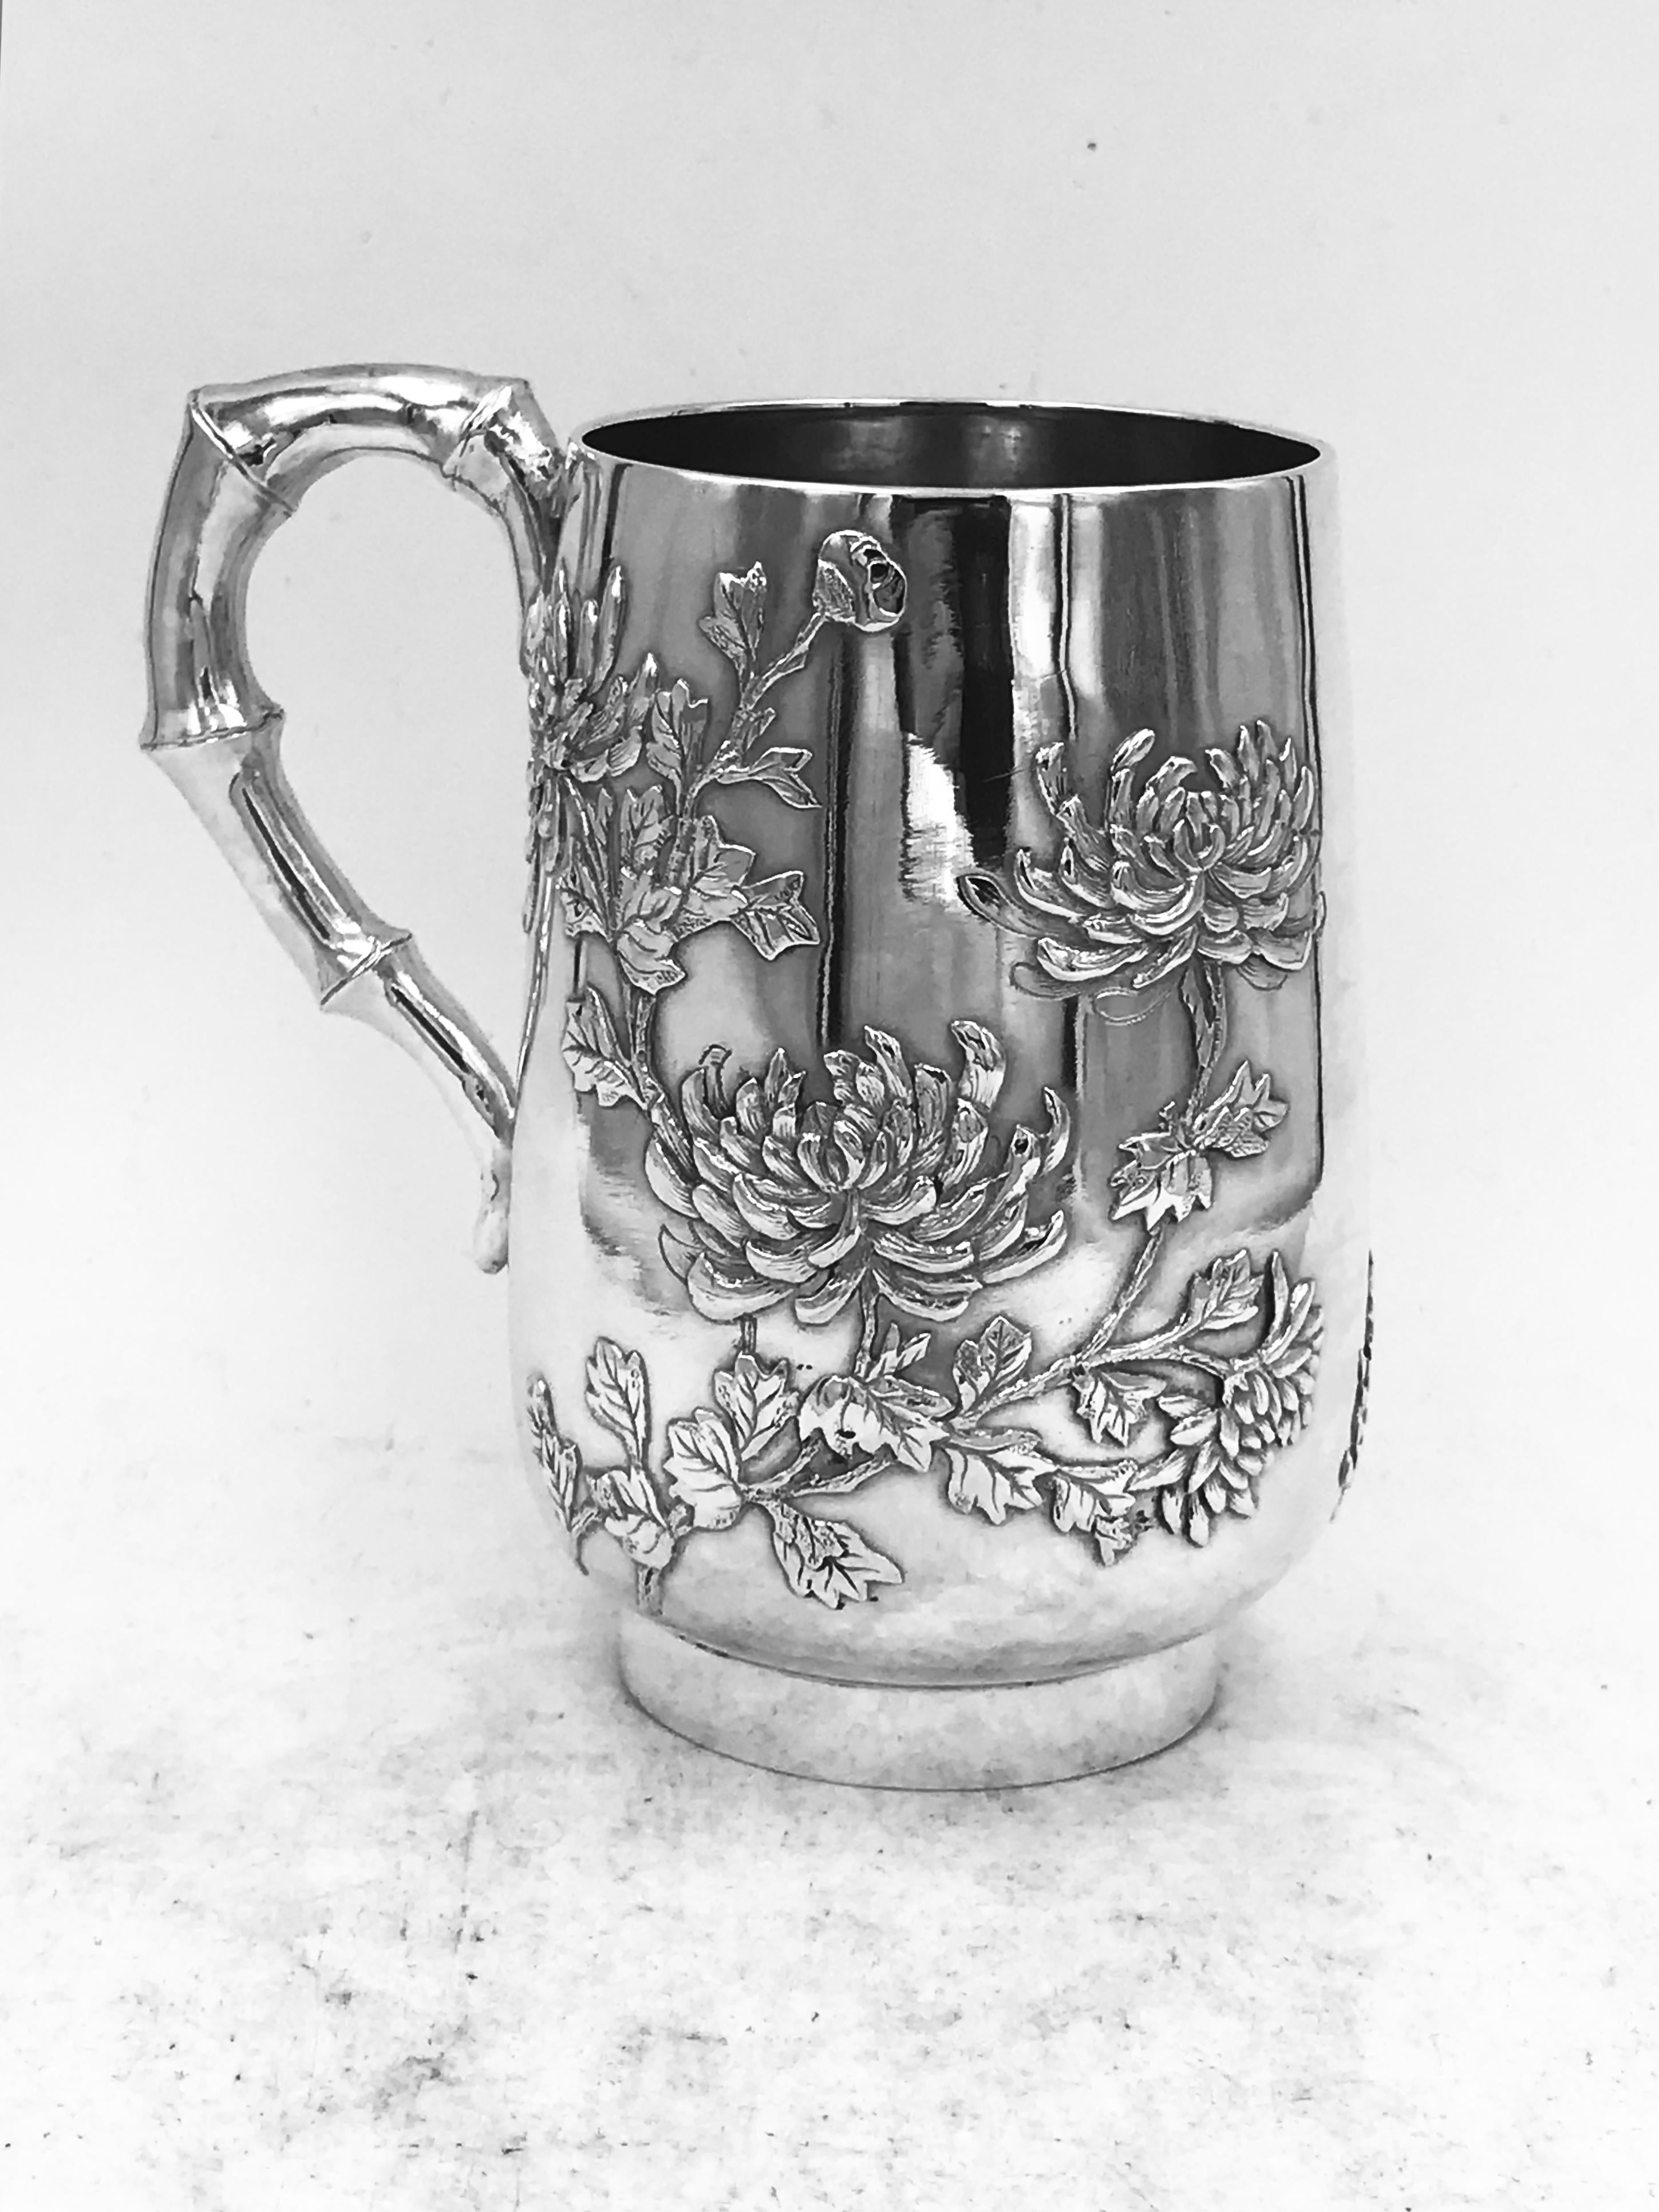 A Chinese silver mug of round form and on collet base, decorated with well detailed chrysanthemum on a plain background, and a simulated bamboo handle. Marked with 'TS', which was used by Tien Shing' (天盛, 1870s--) and 'Tai Sang' (大生, 1900s--), both